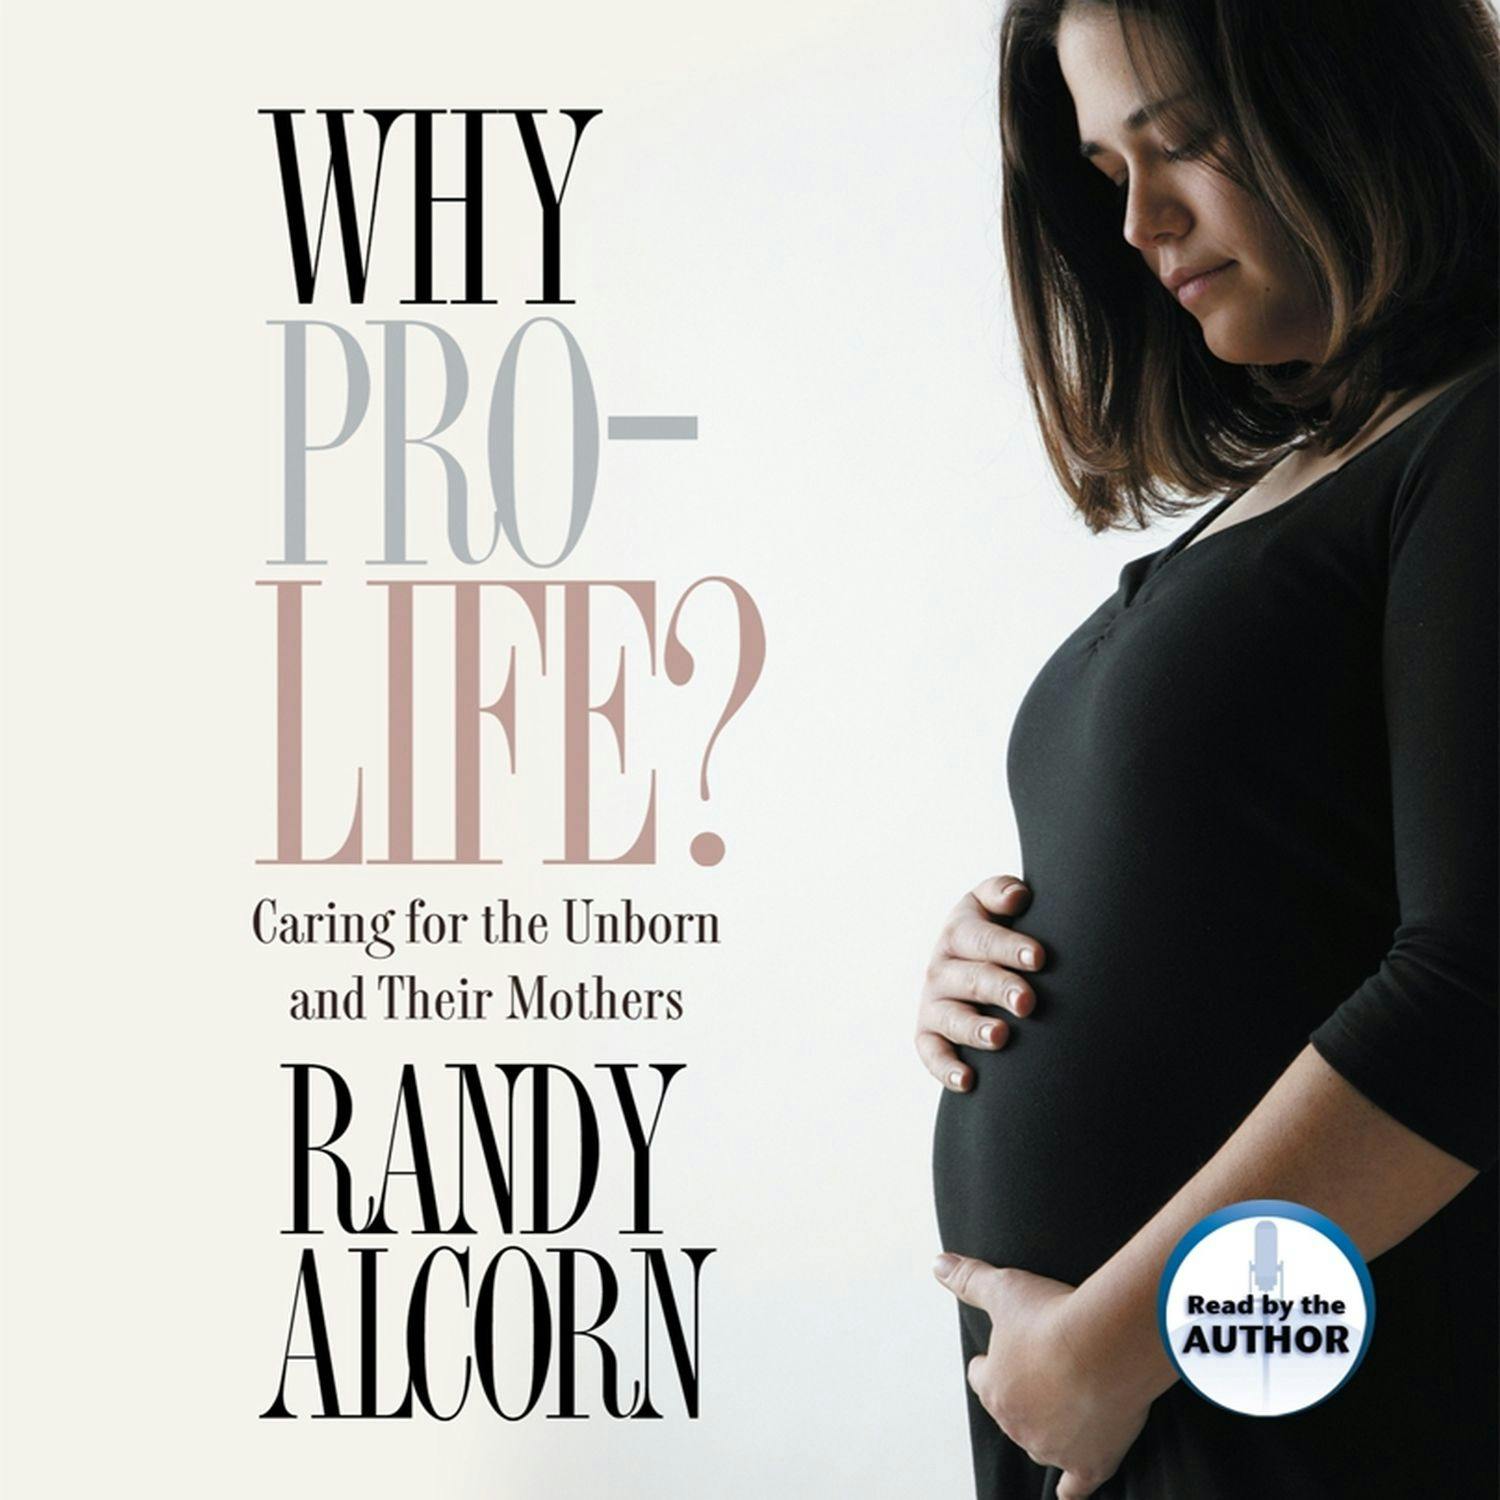 Why Pro-Life?: Caring for the Unborn and Their Mothers - Randy Alcorn